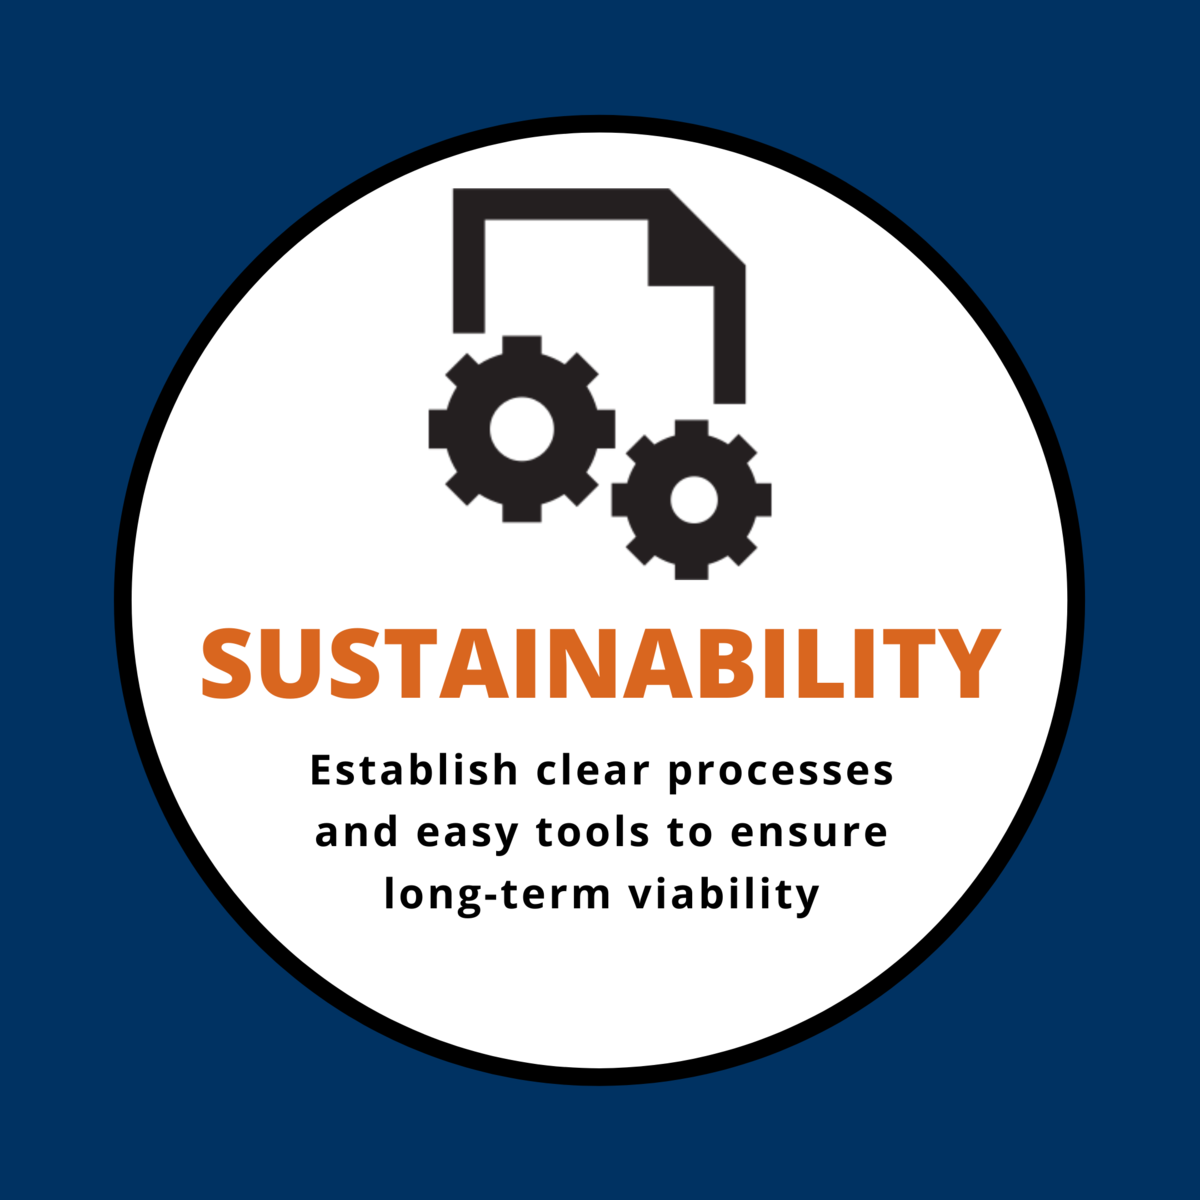 Sustainability: Establish clear processes and easy tools to ensure long-term viability